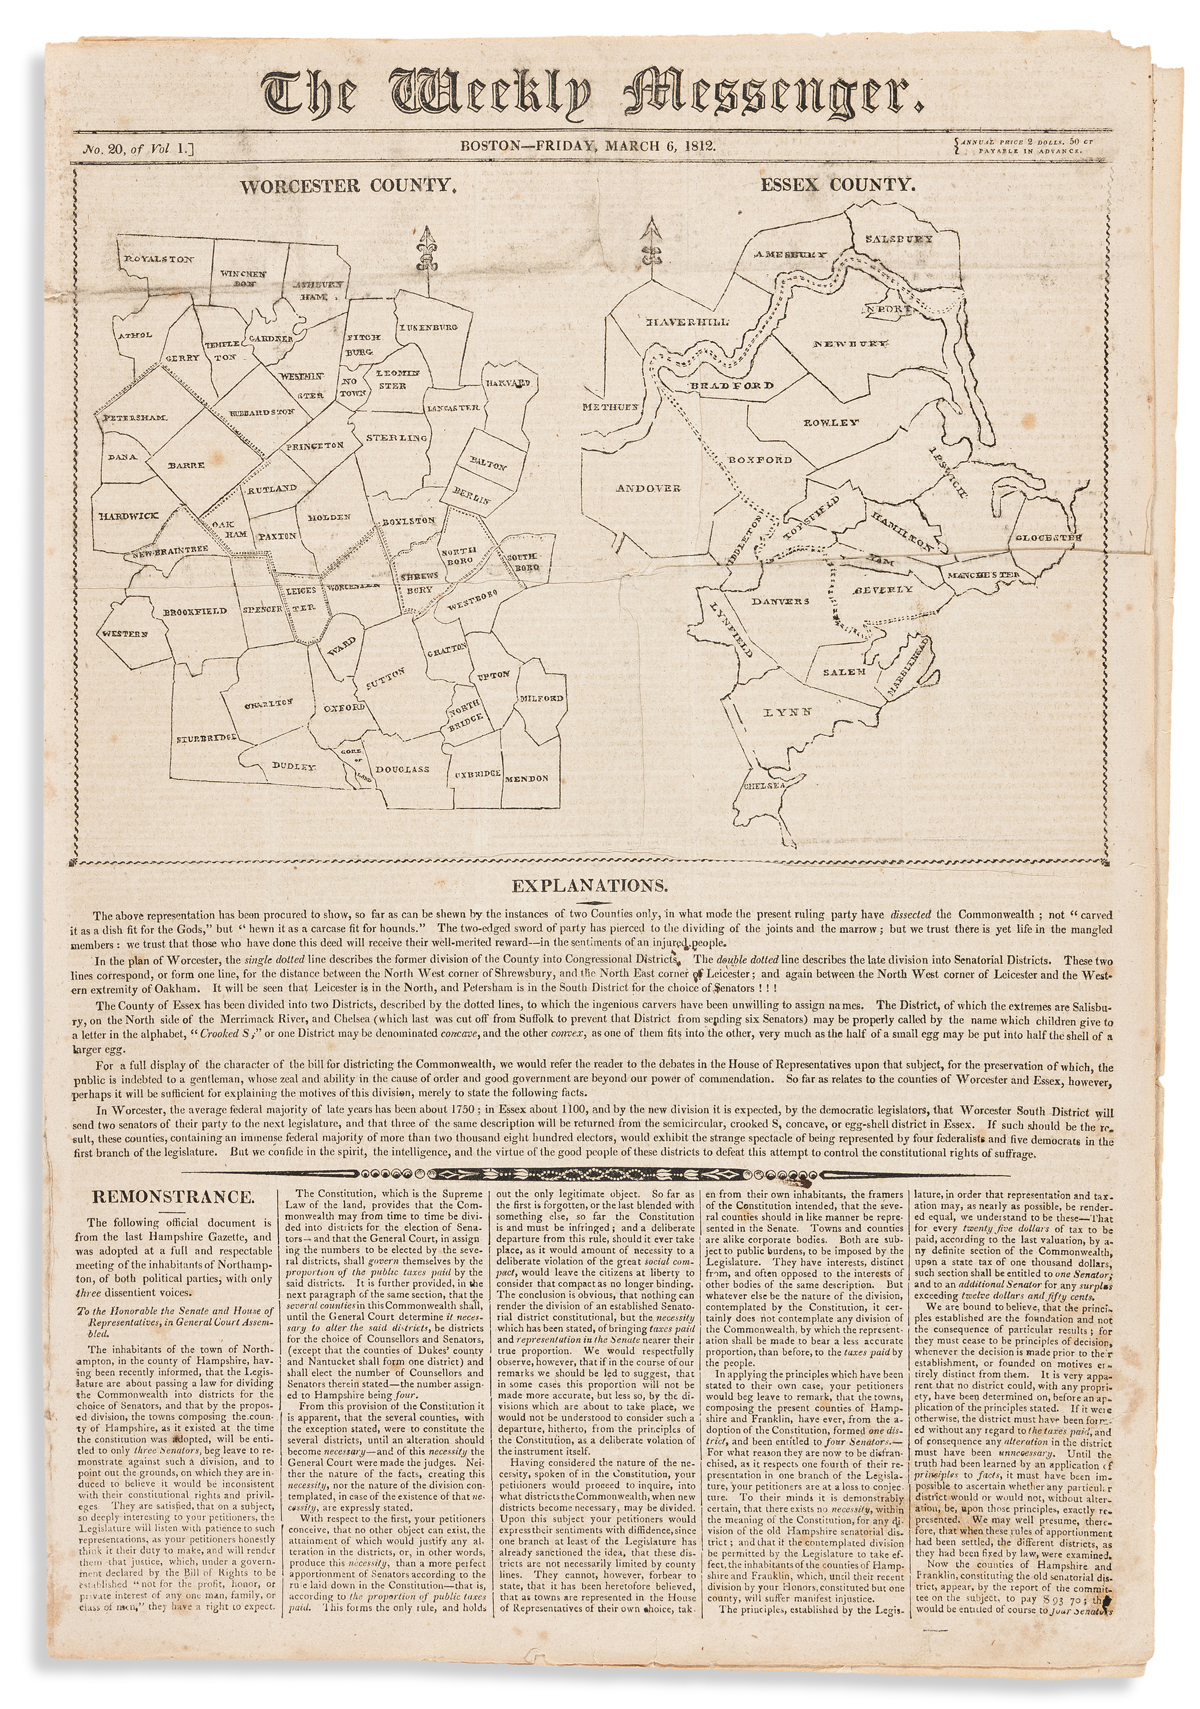 (POLITICS.) Issue of the Boston Weekly Messenger featuring the map which inspired the Gerrymander.